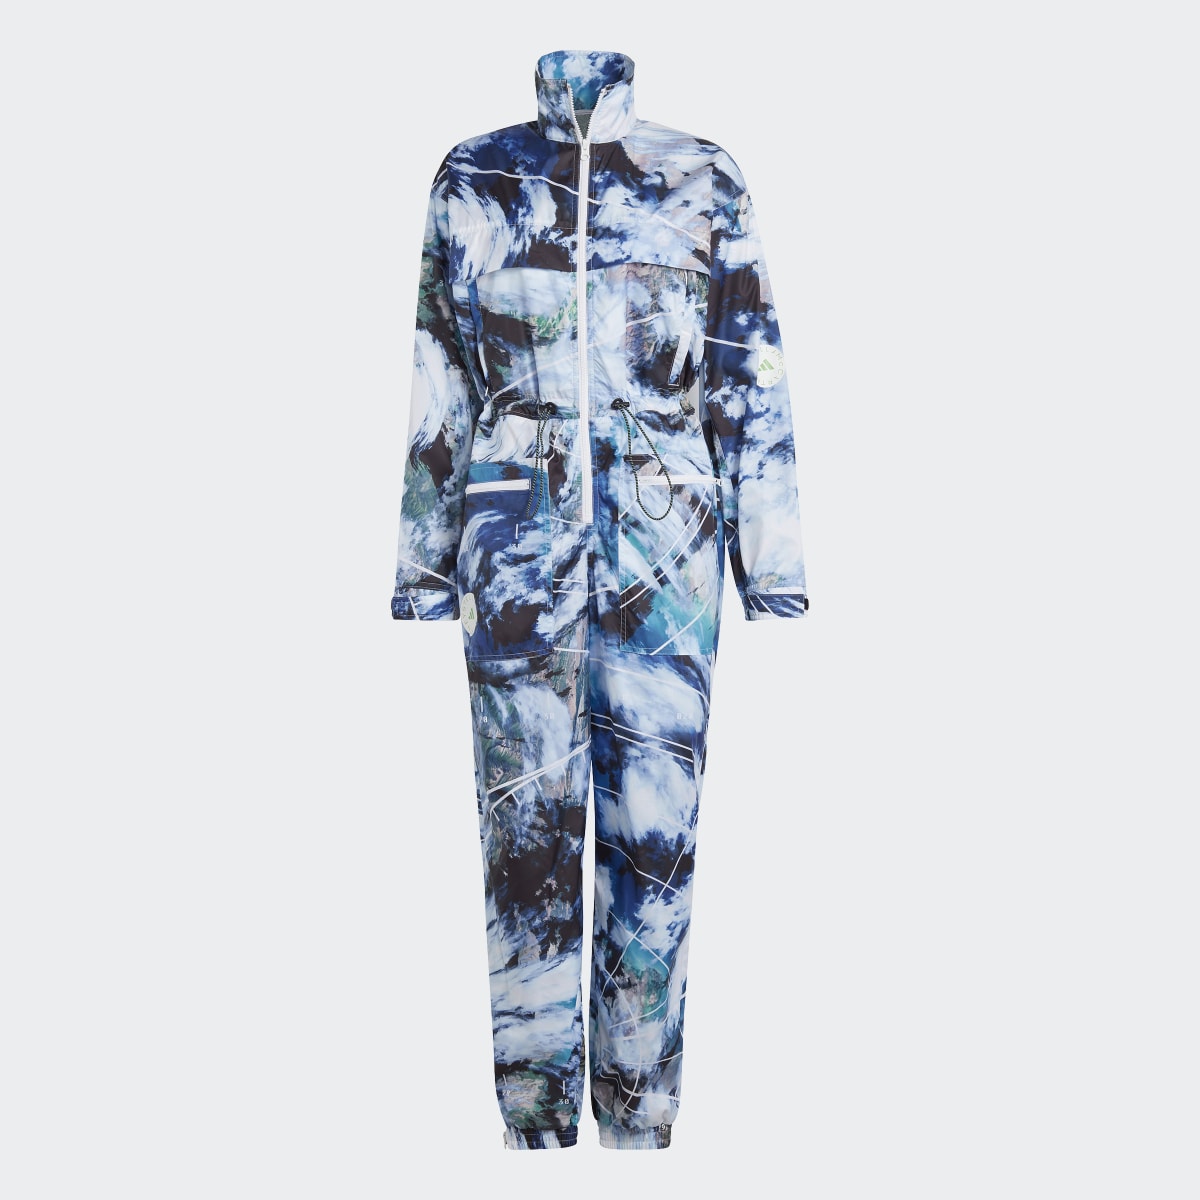 Adidas by Stella McCartney TrueCasuals All-in-One Overall. 5